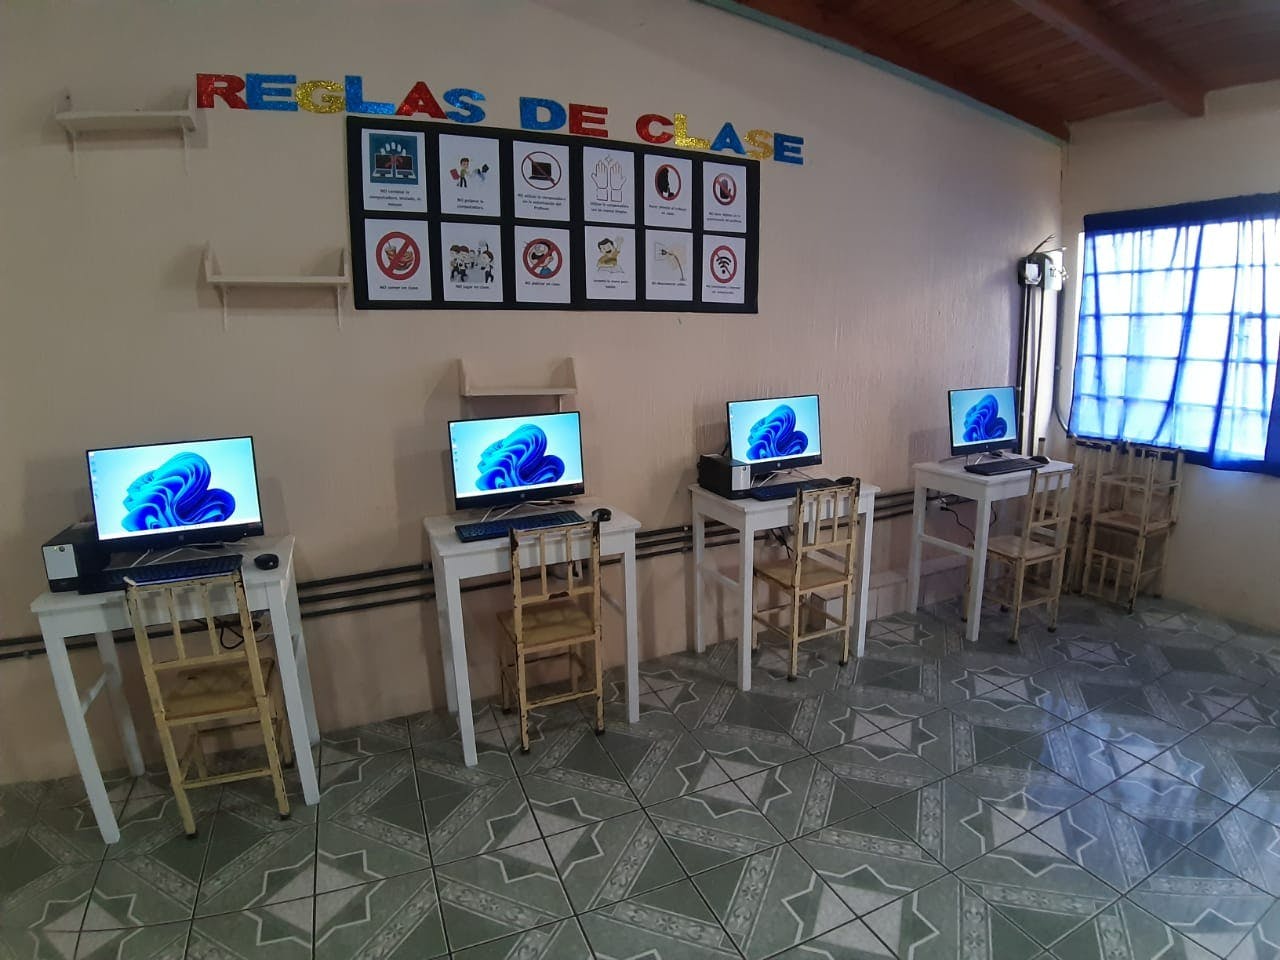 technology learning center in operation